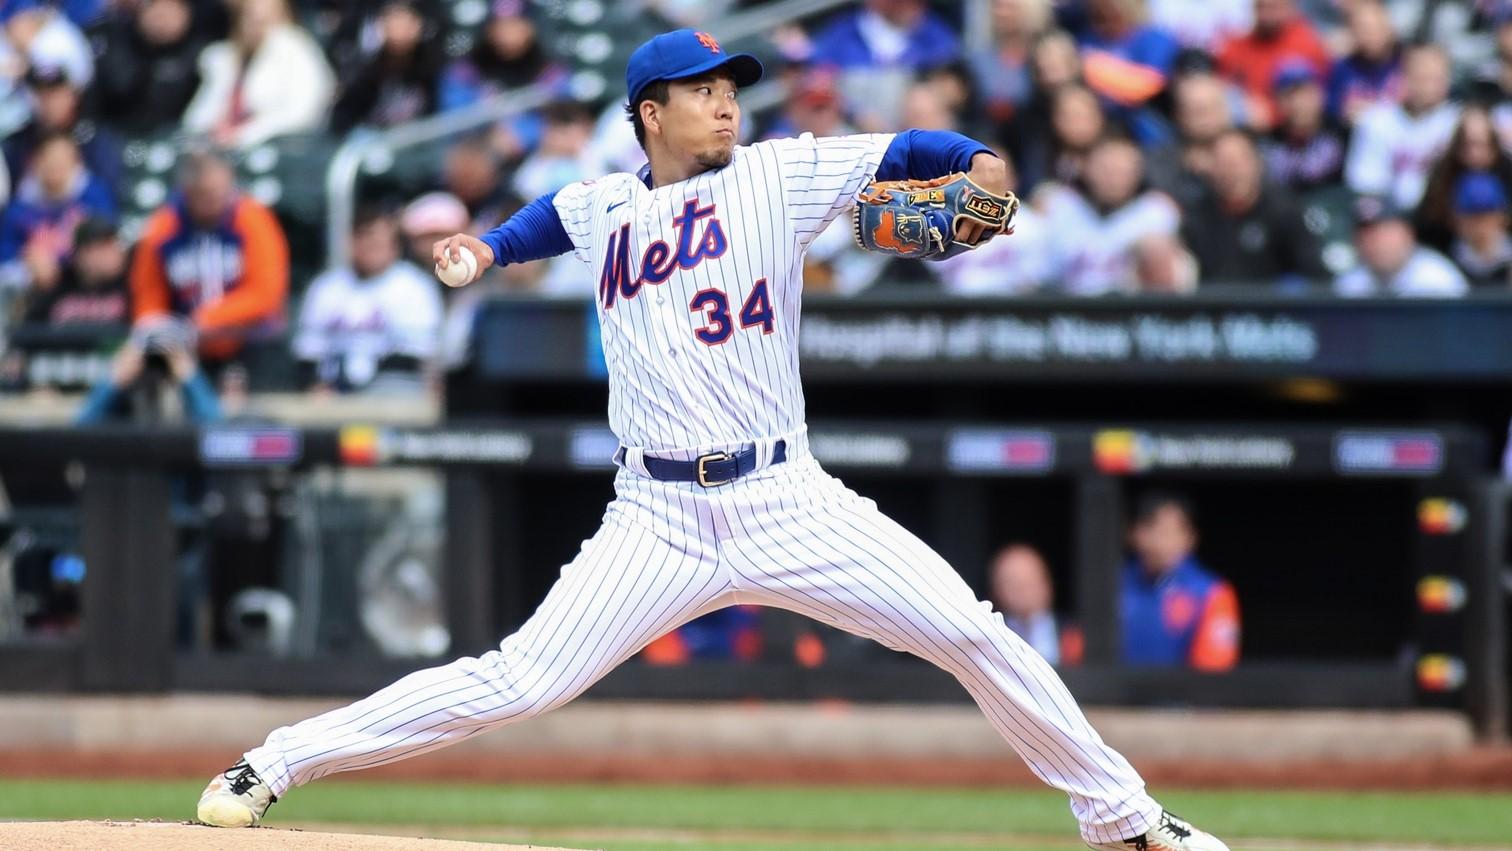 Apr 8, 2023; New York City, New York, USA; New York Mets starting pitcher Kodai Senga (34) pitches in the first inning against the Miami Marlins at Citi Field. / Wendell Cruz-USA TODAY Sports